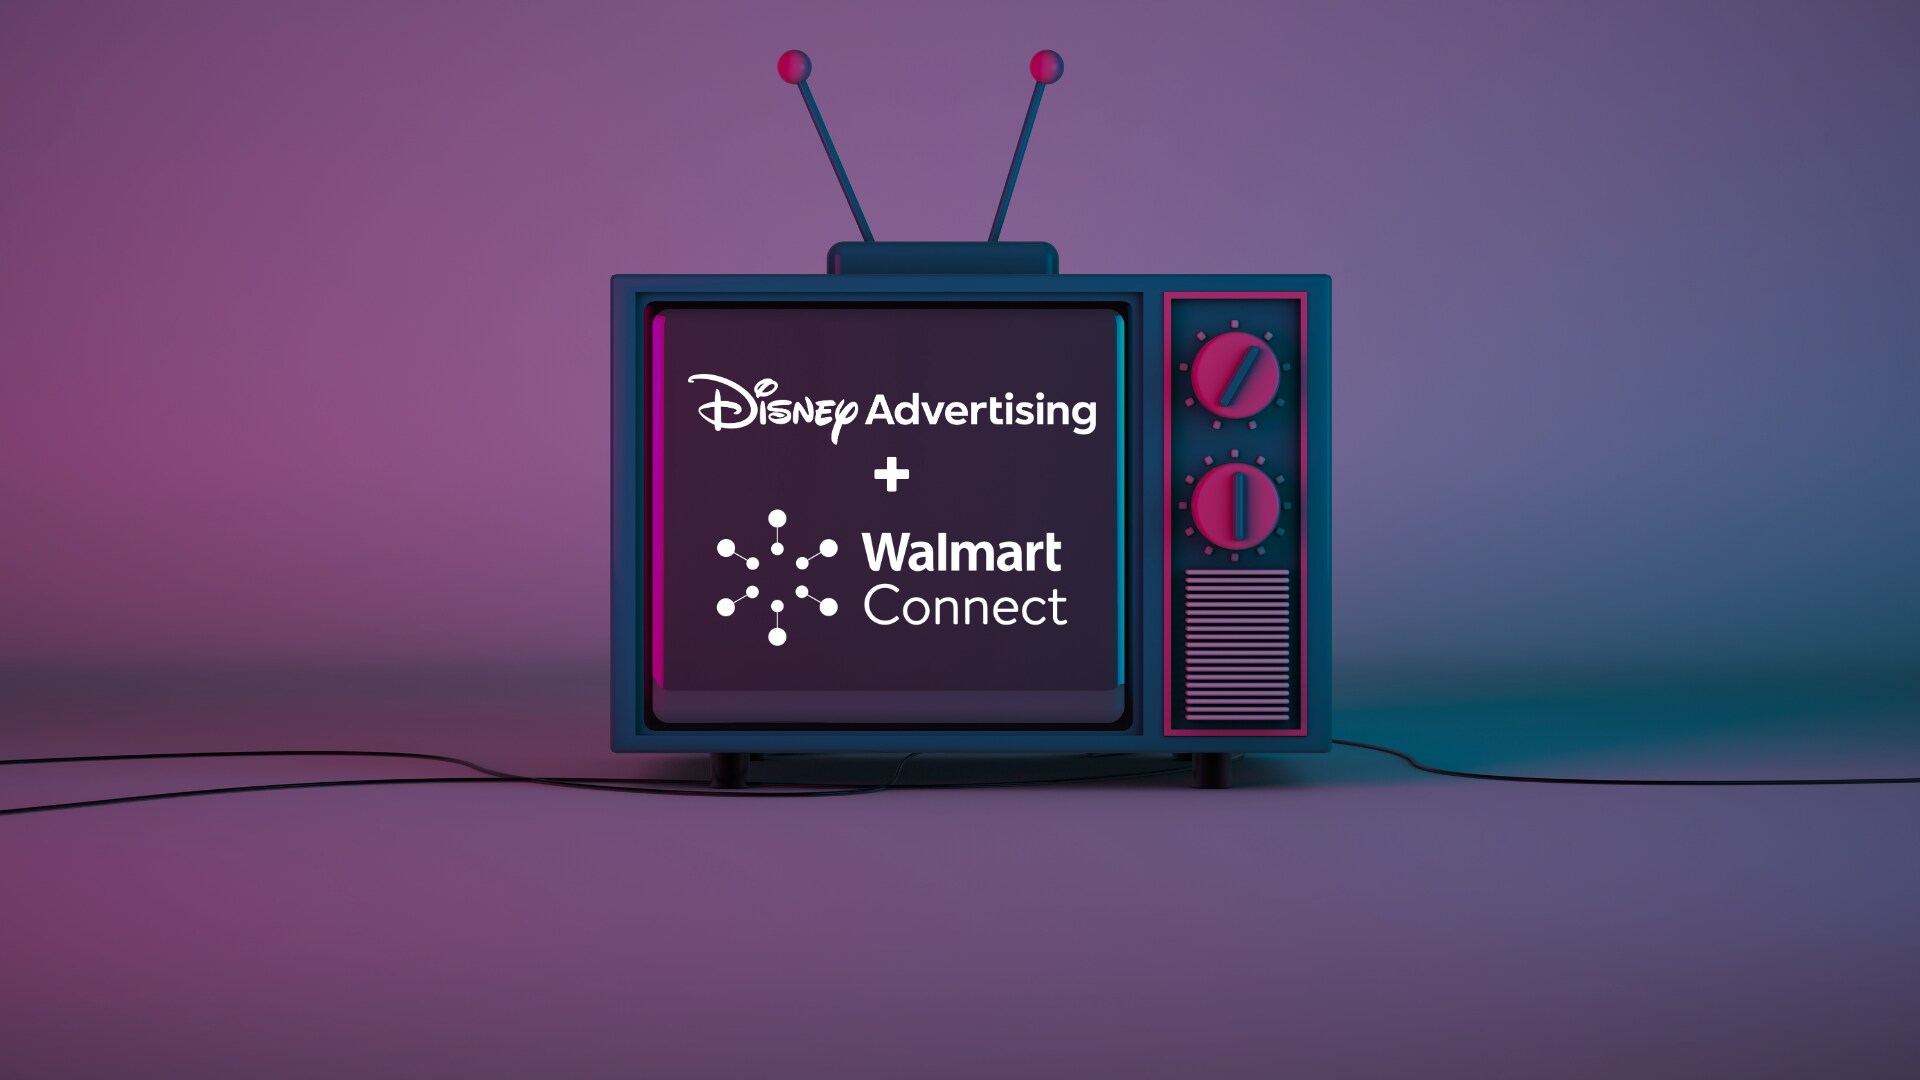 Disney Advertising and Walmart Connect to Bring Closed-Loop Attribution To Streaming Advertisers  